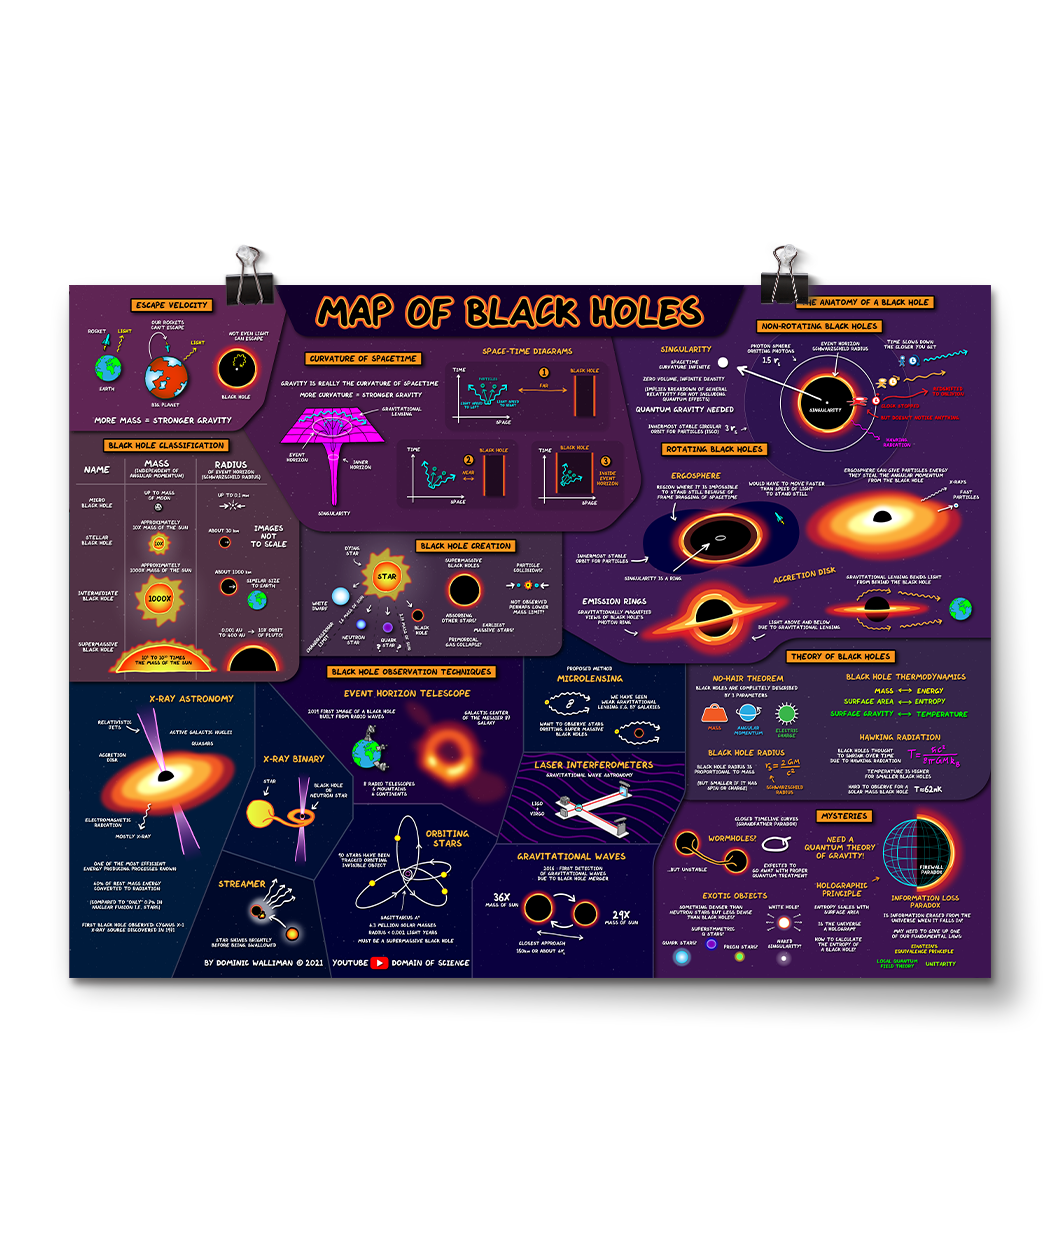 A purple and blue horizontal poster covered in text and images of black holes - by Domain of Science